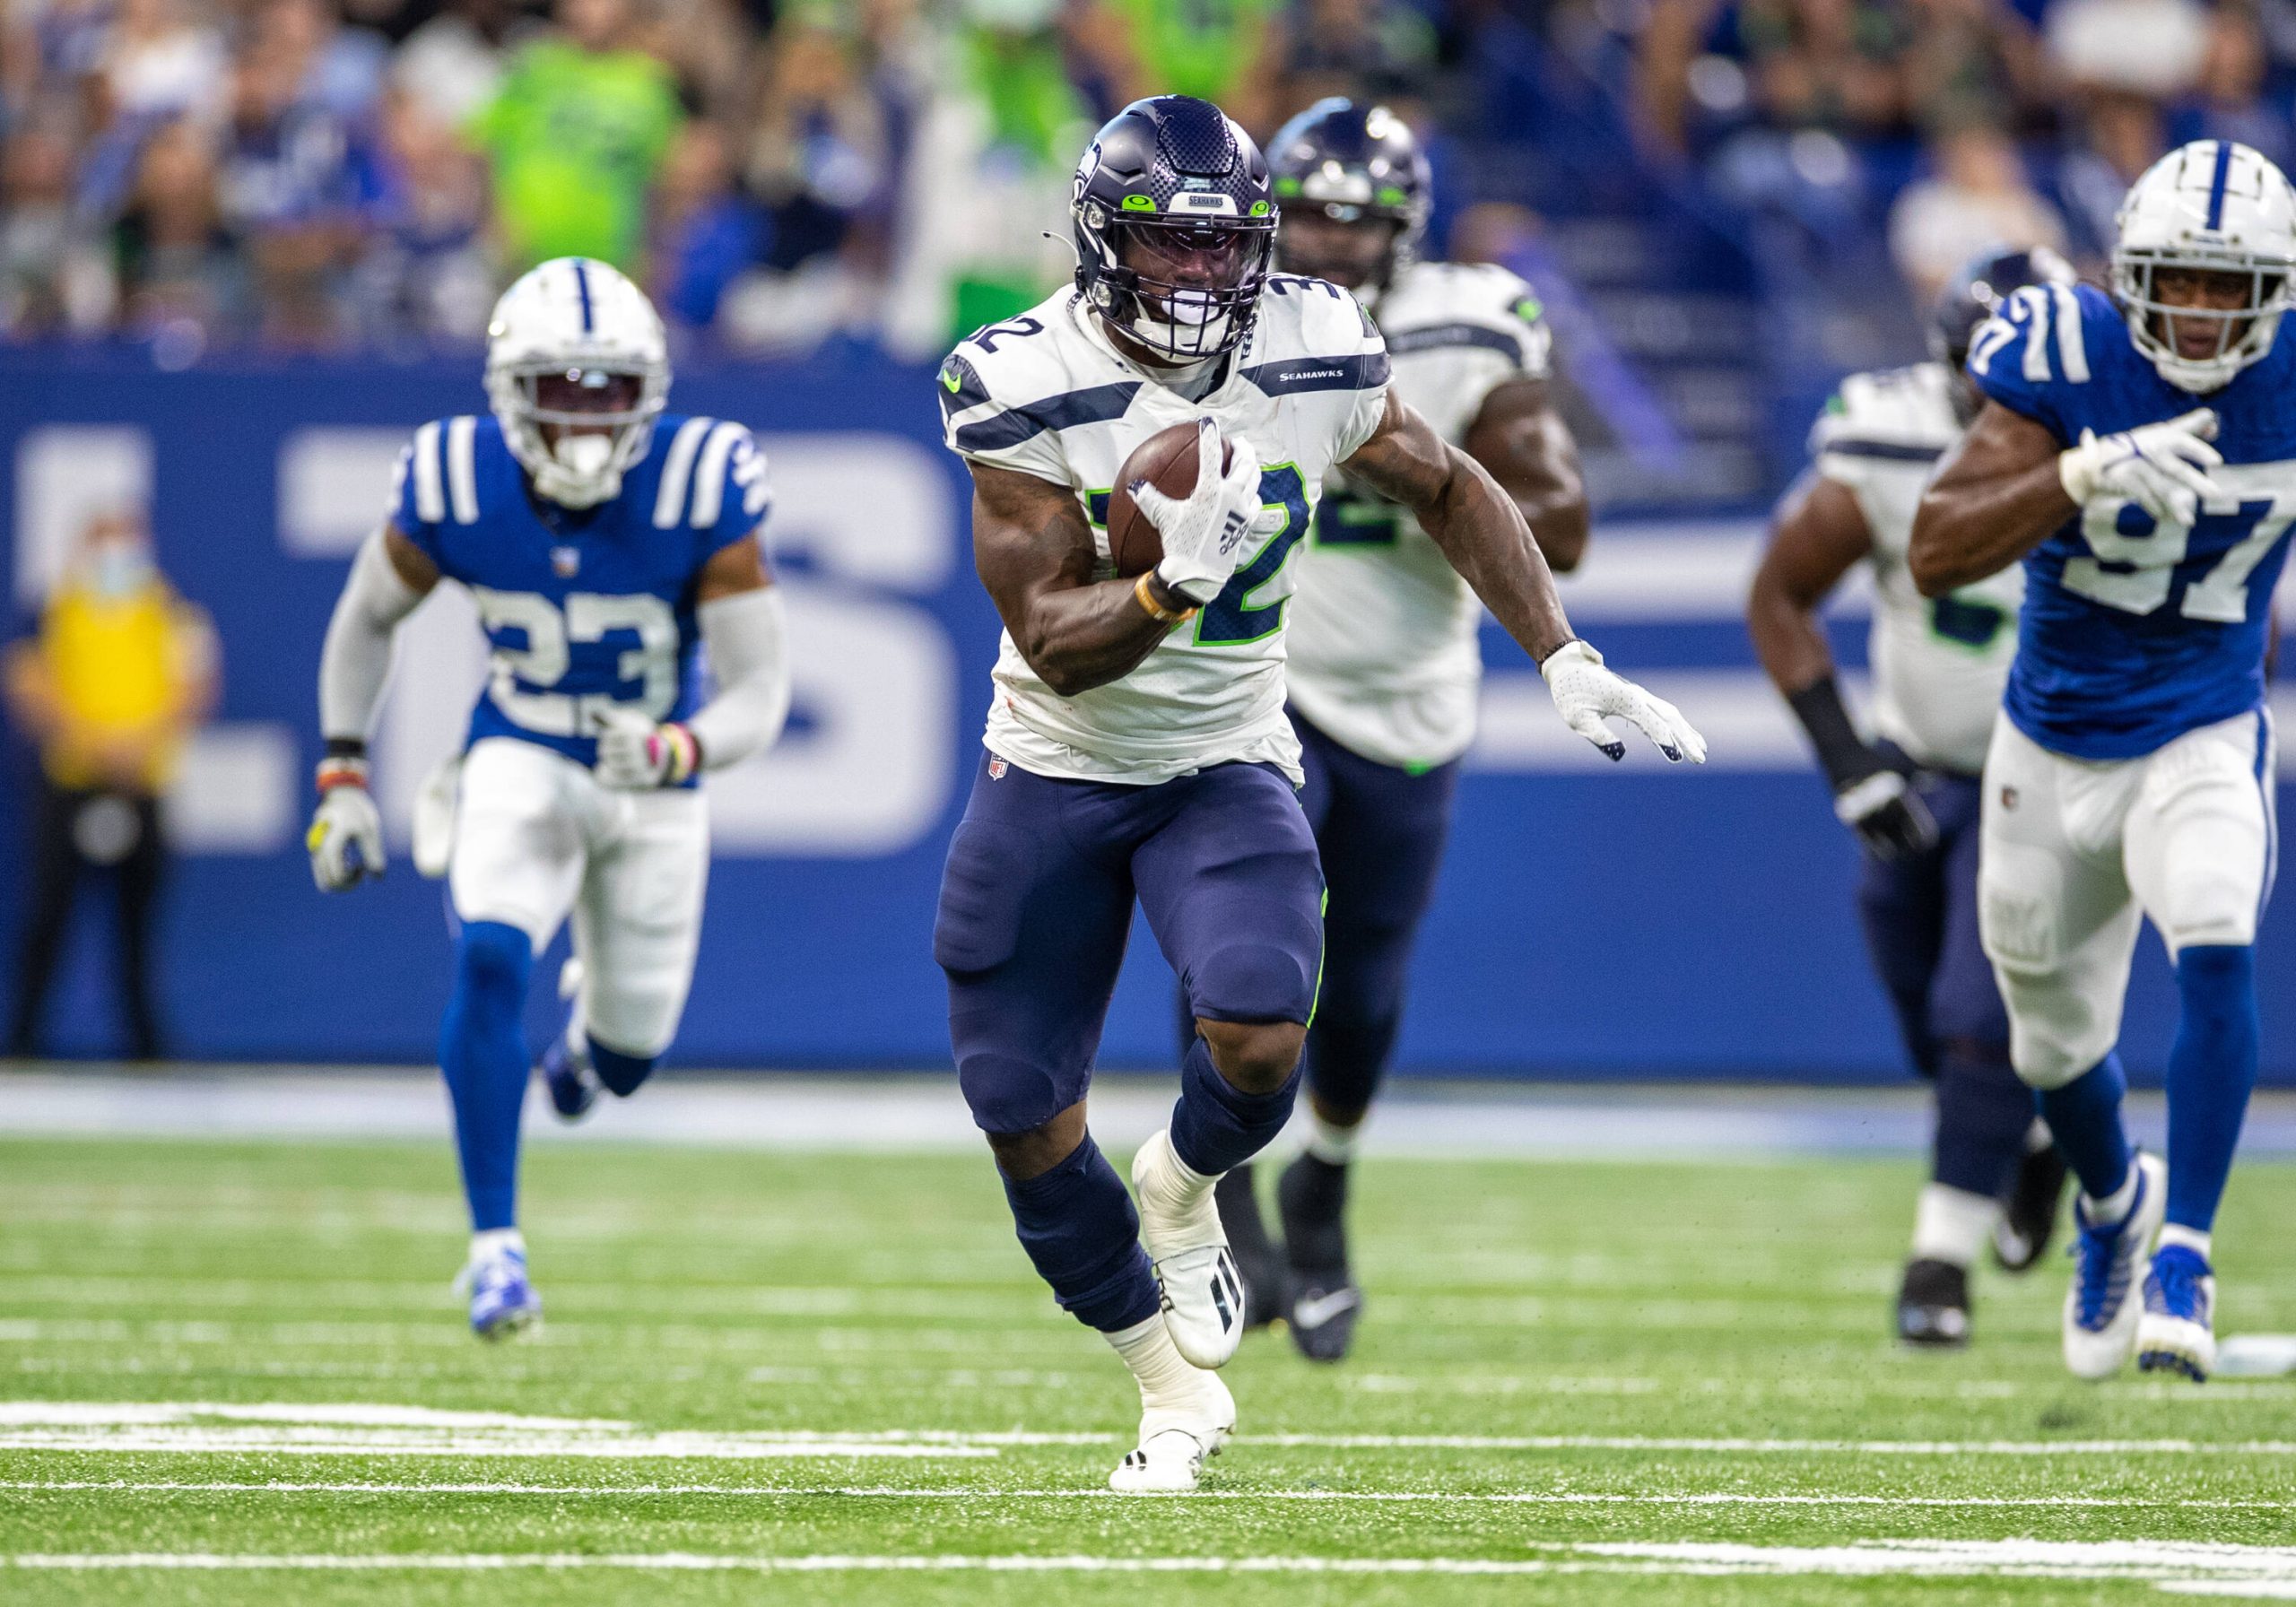 September 12, 2021: Seattle Seahawks running back Chris Carson 32 runs with the ball during NFL, American Football Herren, USA football game action between the Seattle Seahawks and the Indianapolis Colts at Lucas Oil Stadium in Indianapolis, Indiana. Seattle defeated Indianapolis 28-16. /CSM. USA - ZUMAc04_ 20210912_zaf_c04_631 Copyright: xJohnxMersitsx